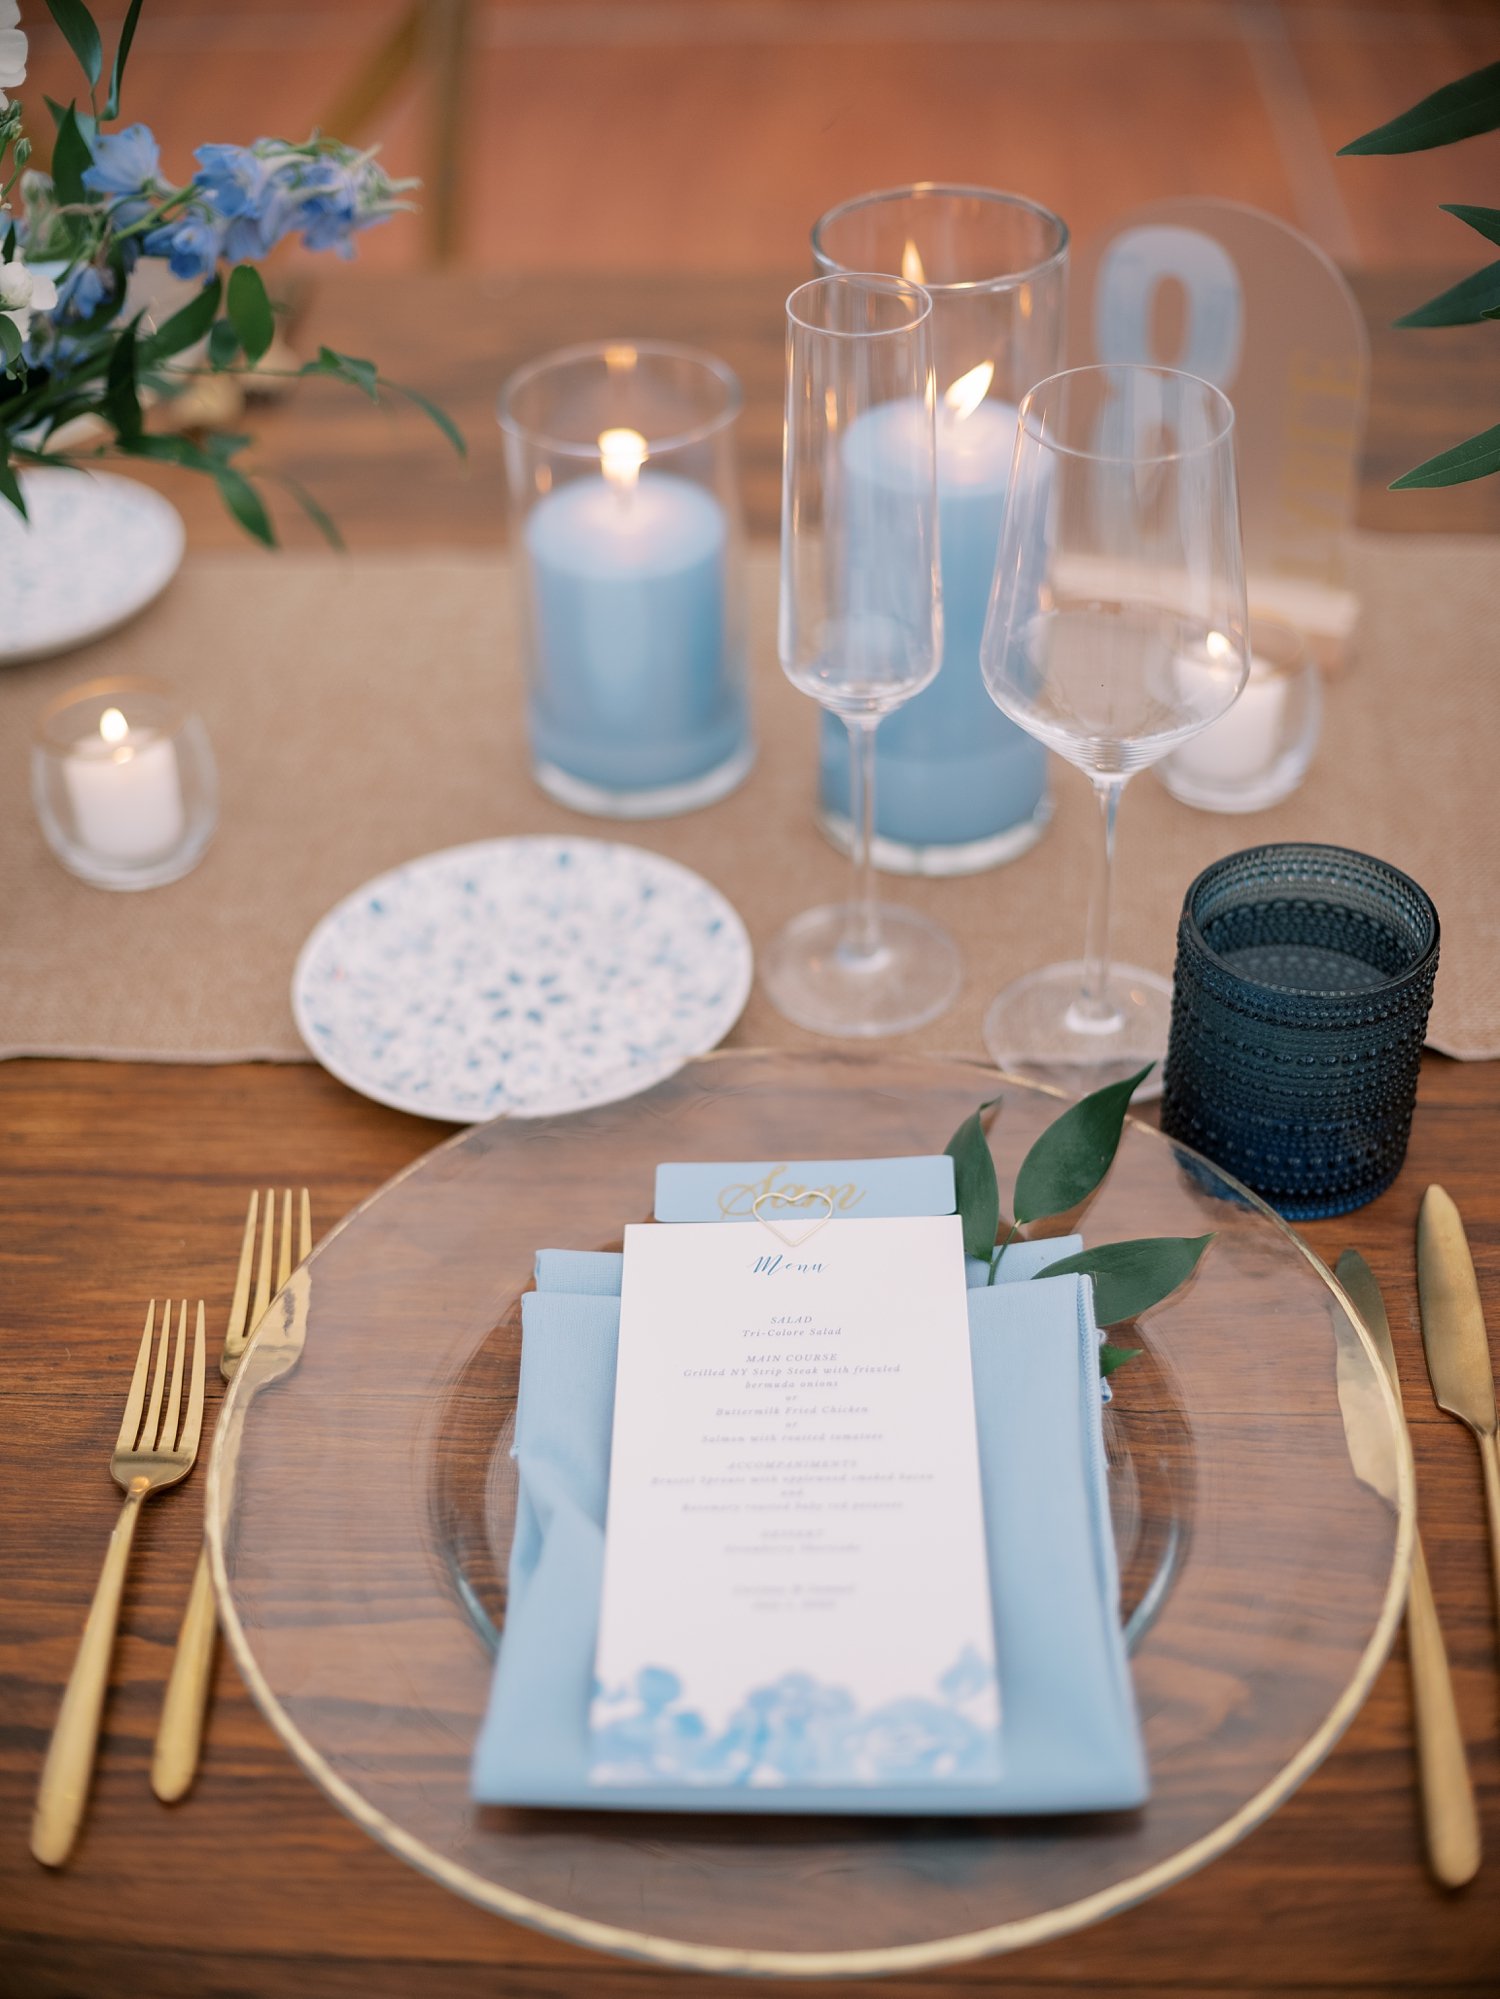 place setting on wooden table with clear plate with gold rim and blue menu card